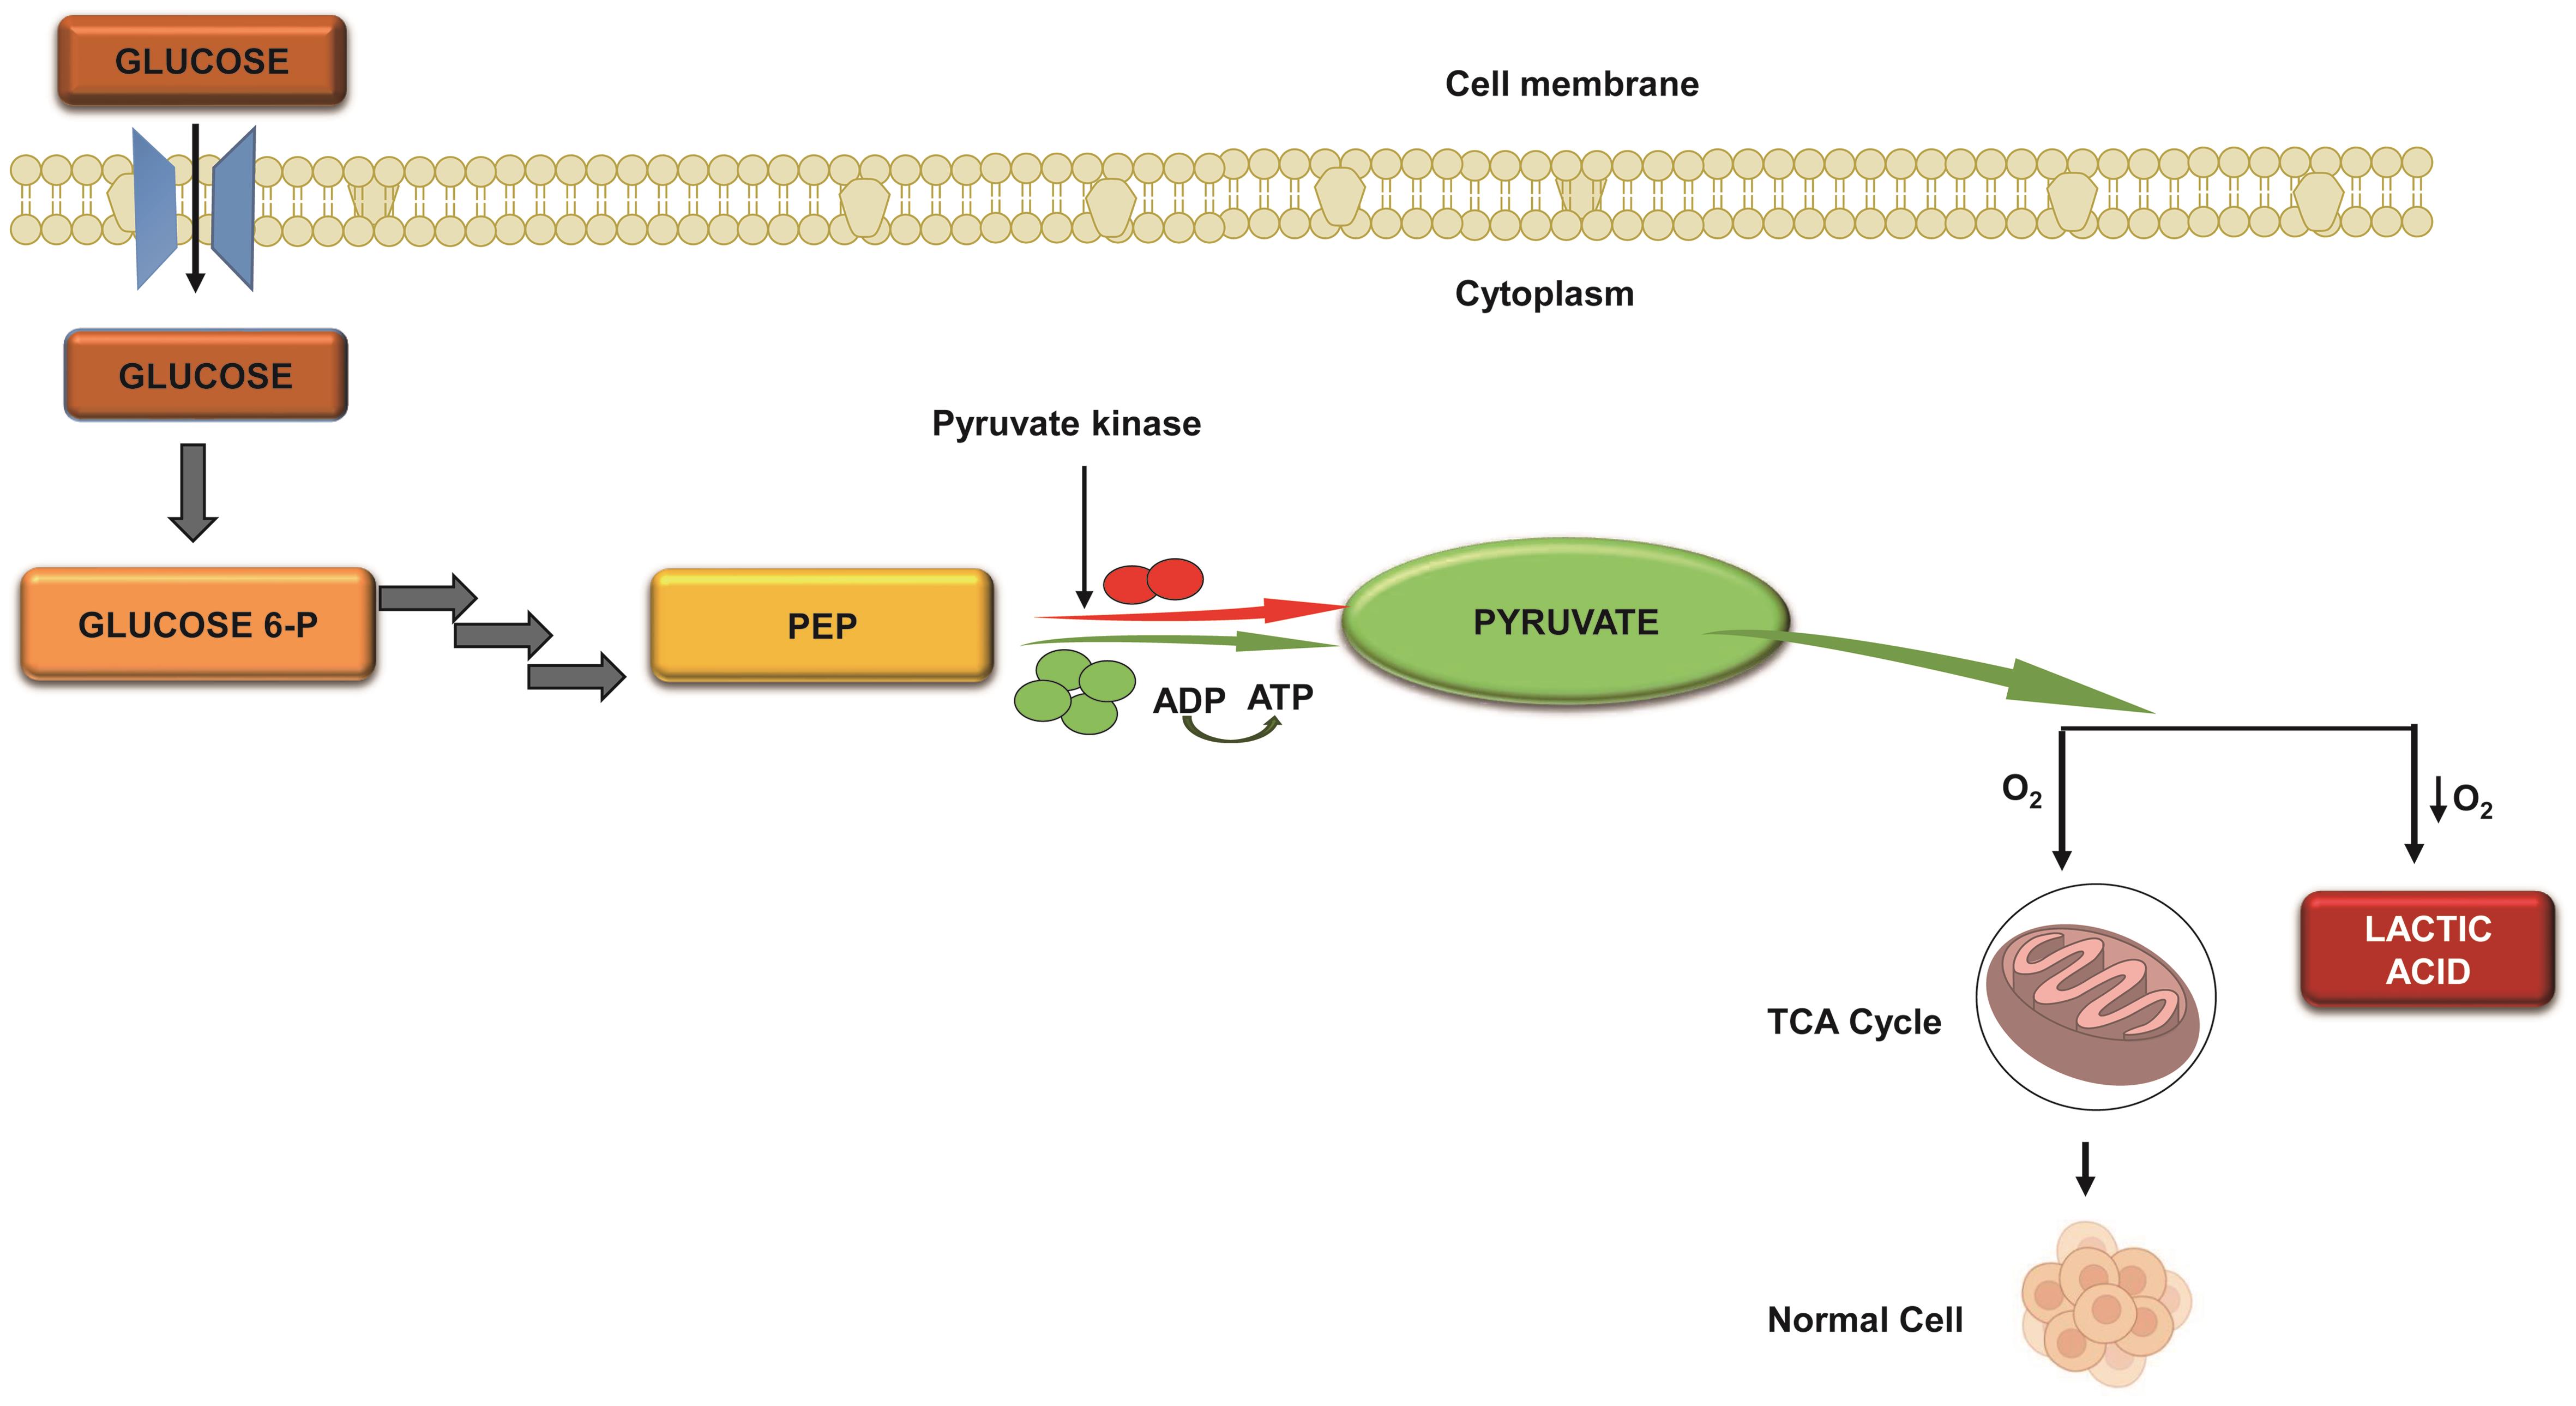 Illustration depicting the role of pyruvate kinase in glycolysis of normal cells and cancerous cells.